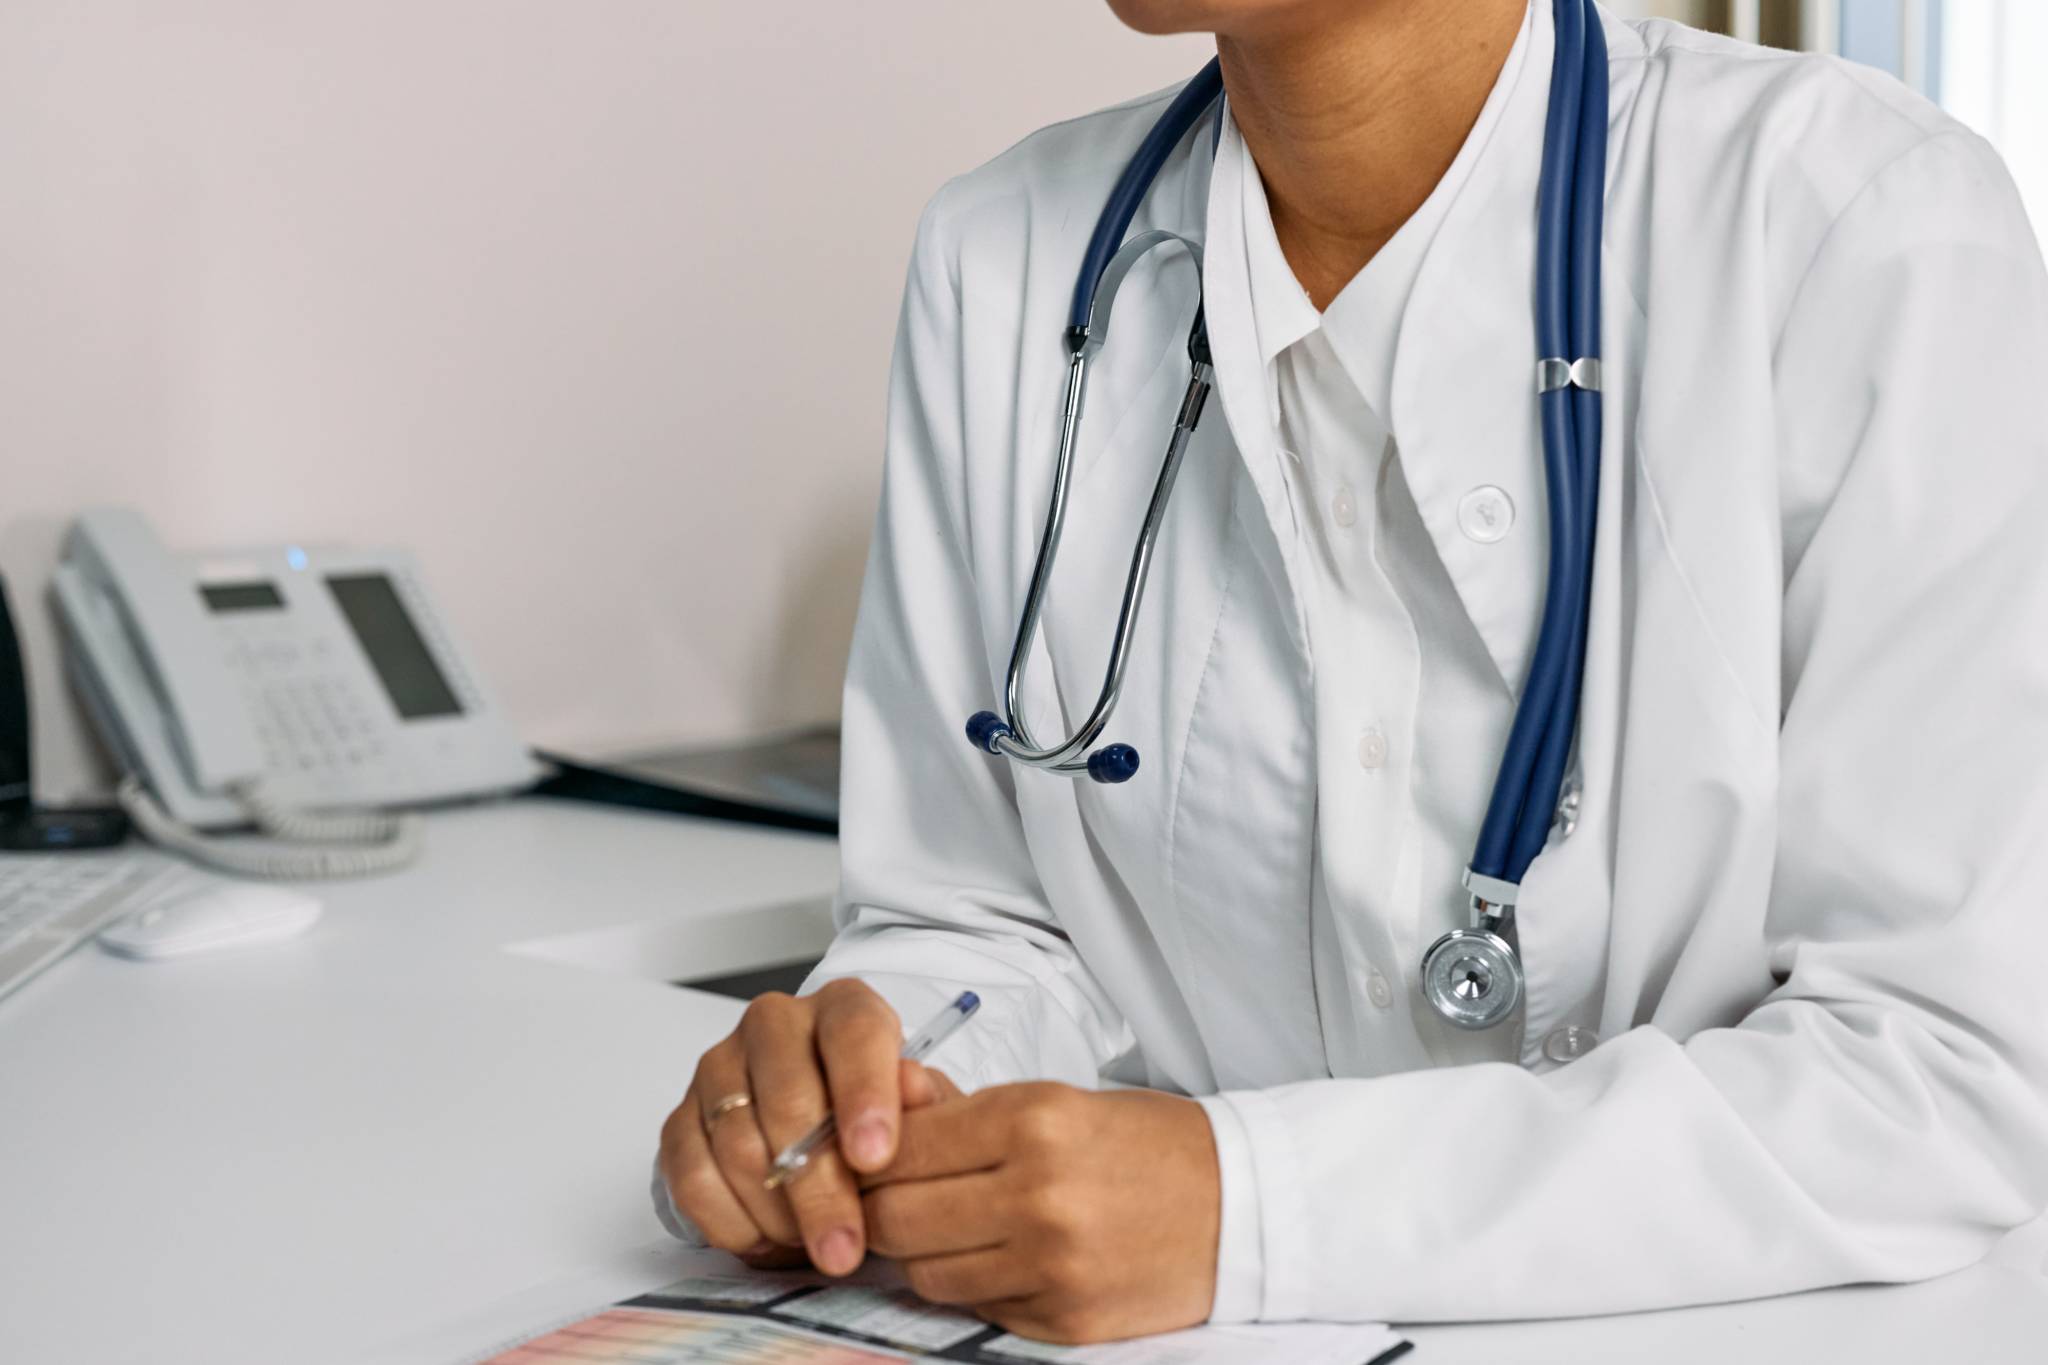 Healthcare worker wearing stethoscope sitting at desk taking notes